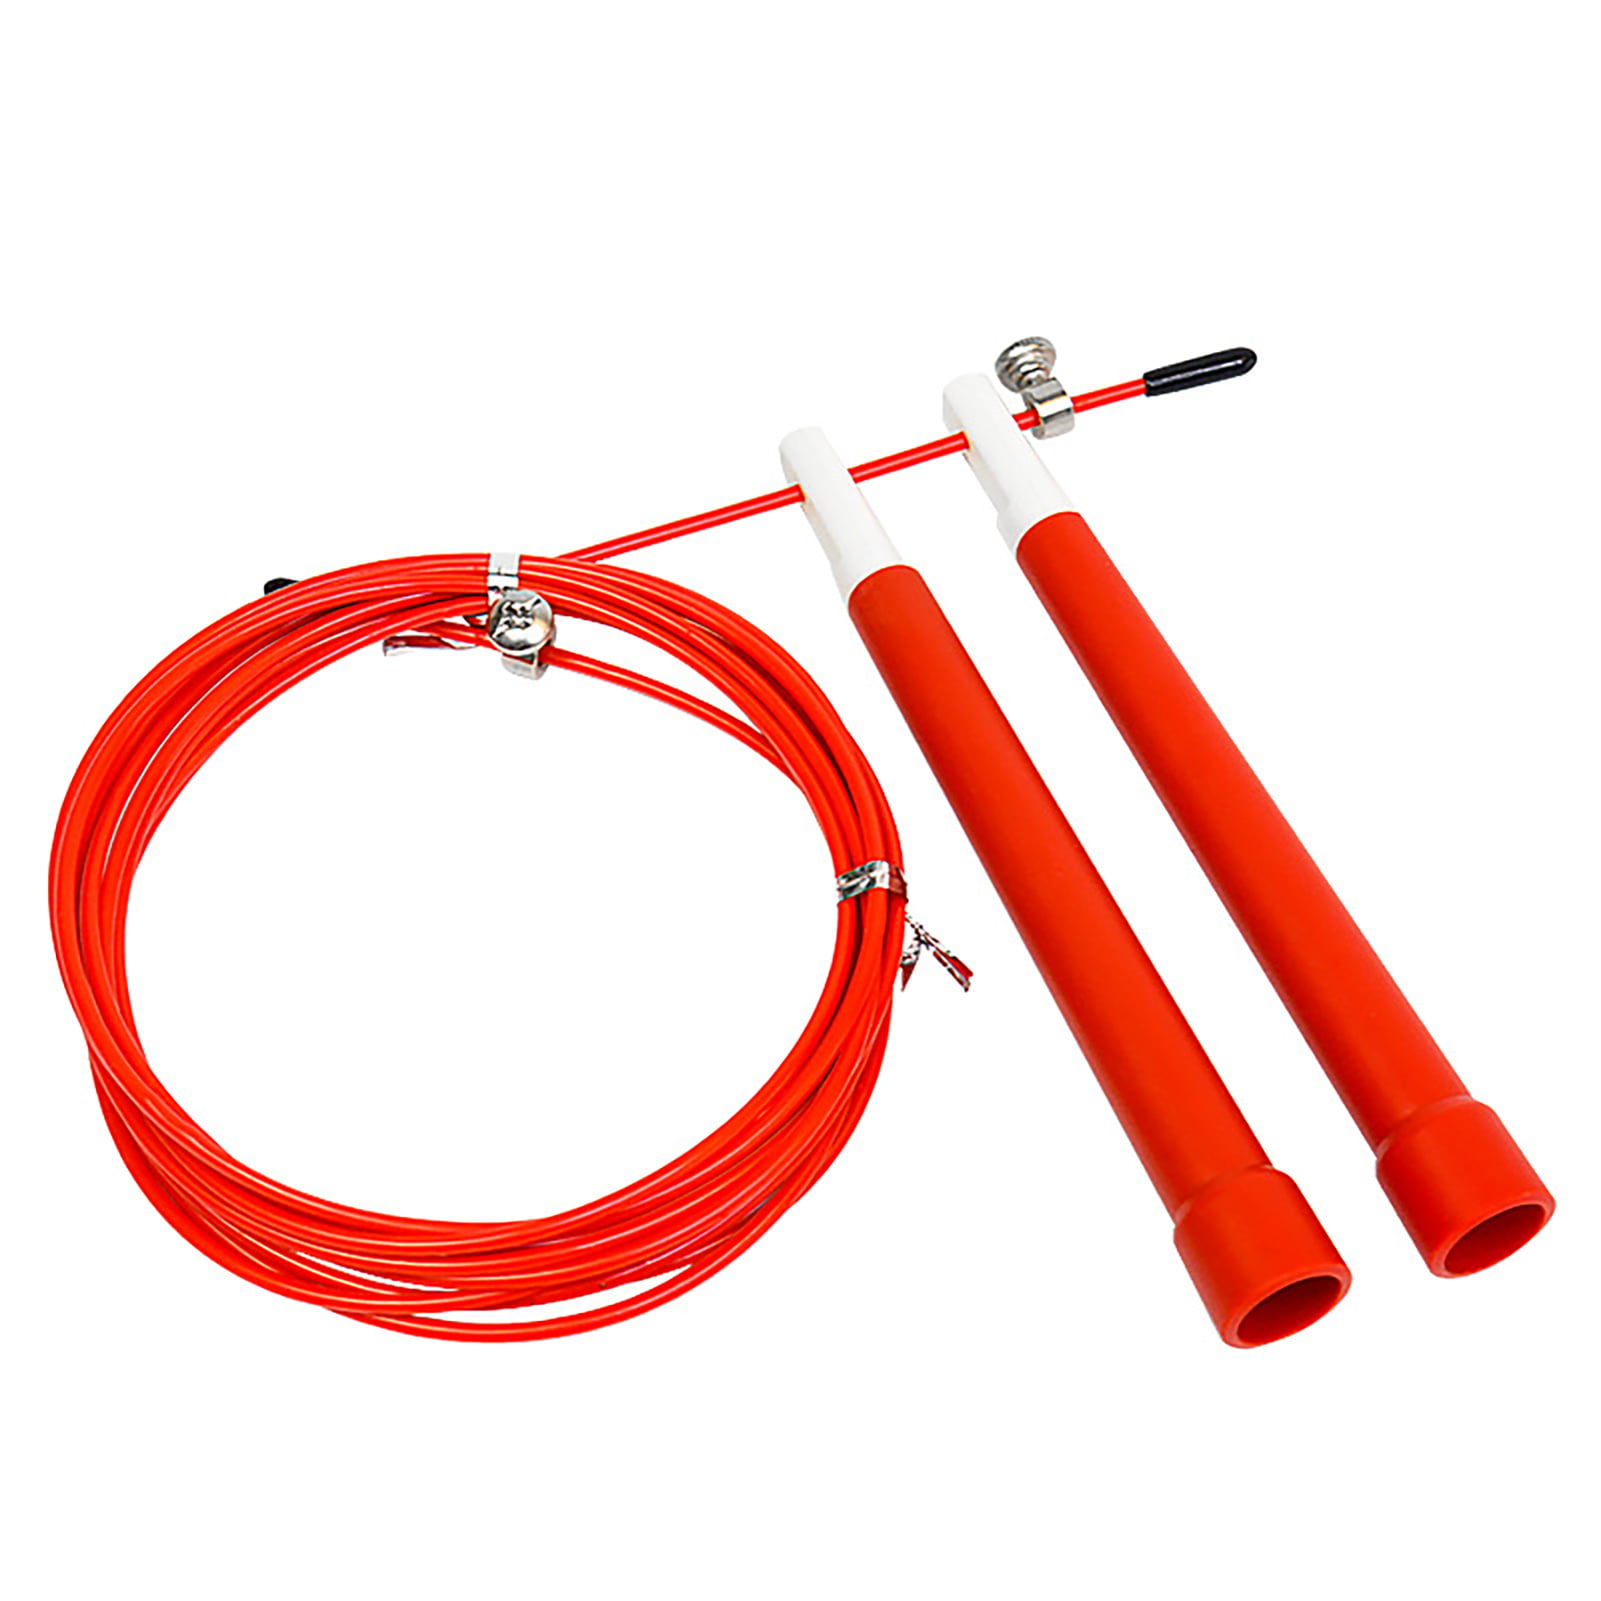 Details about   Adjustable Speed Cable Jump Skipping Rope Fitness Gym Exercise Trainer Equipment 